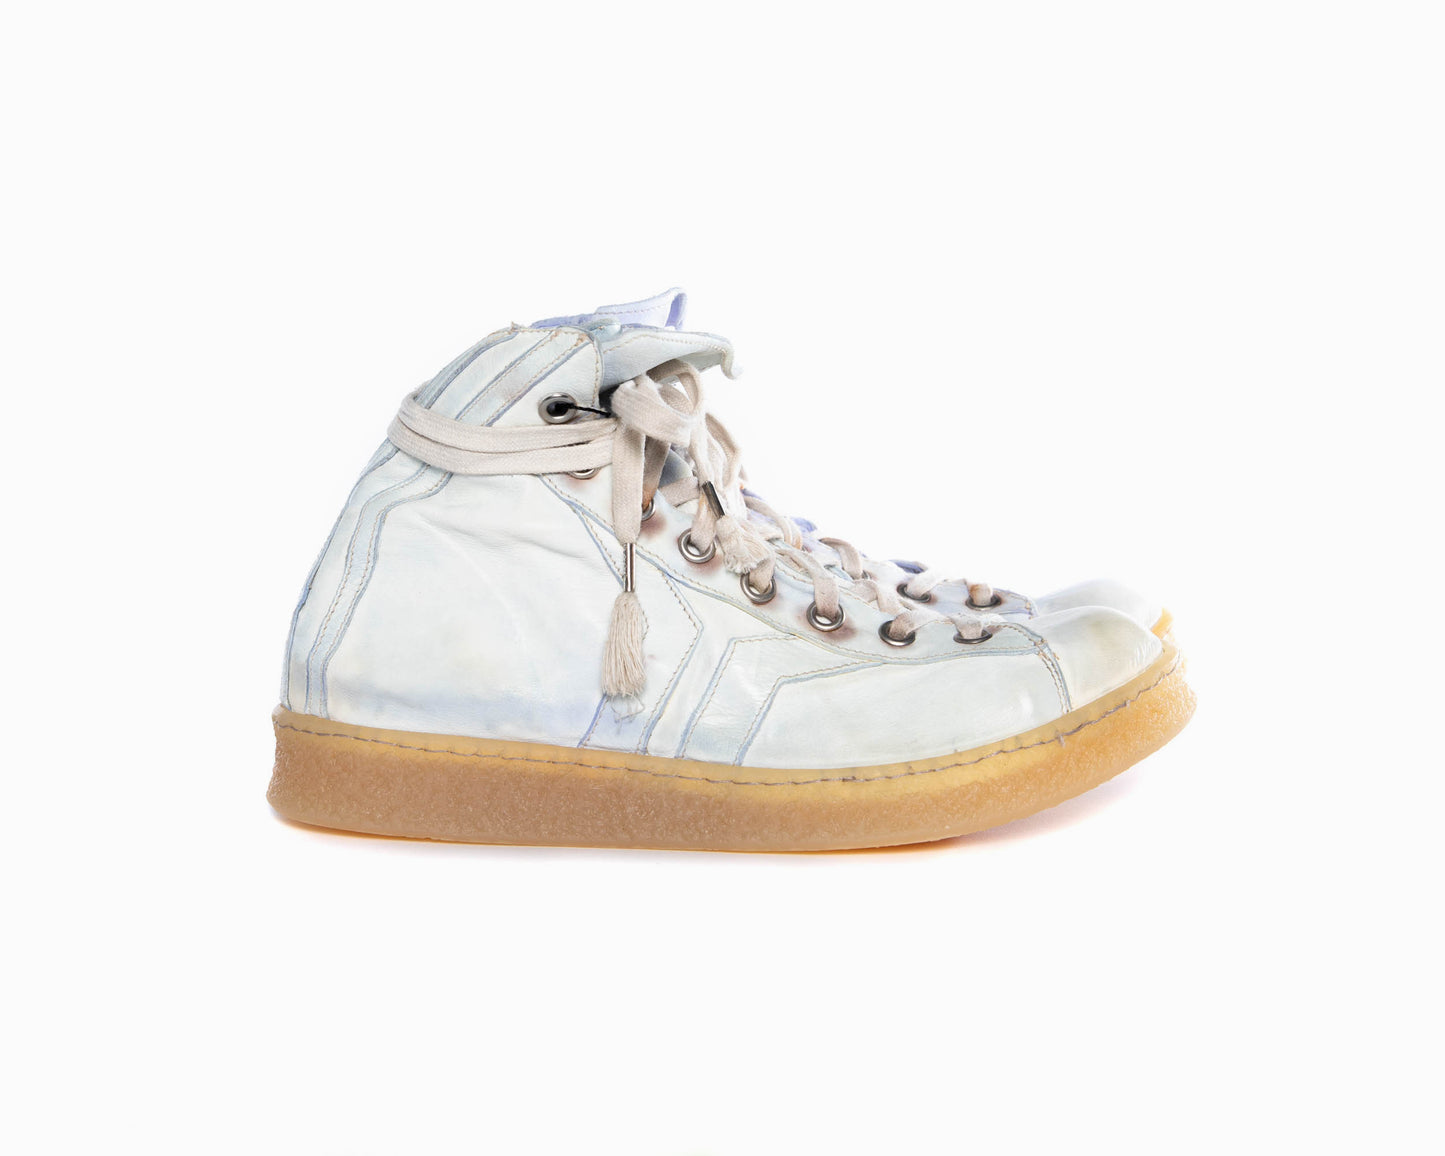 Heather Grit Mid Top Sneakers GRTM1